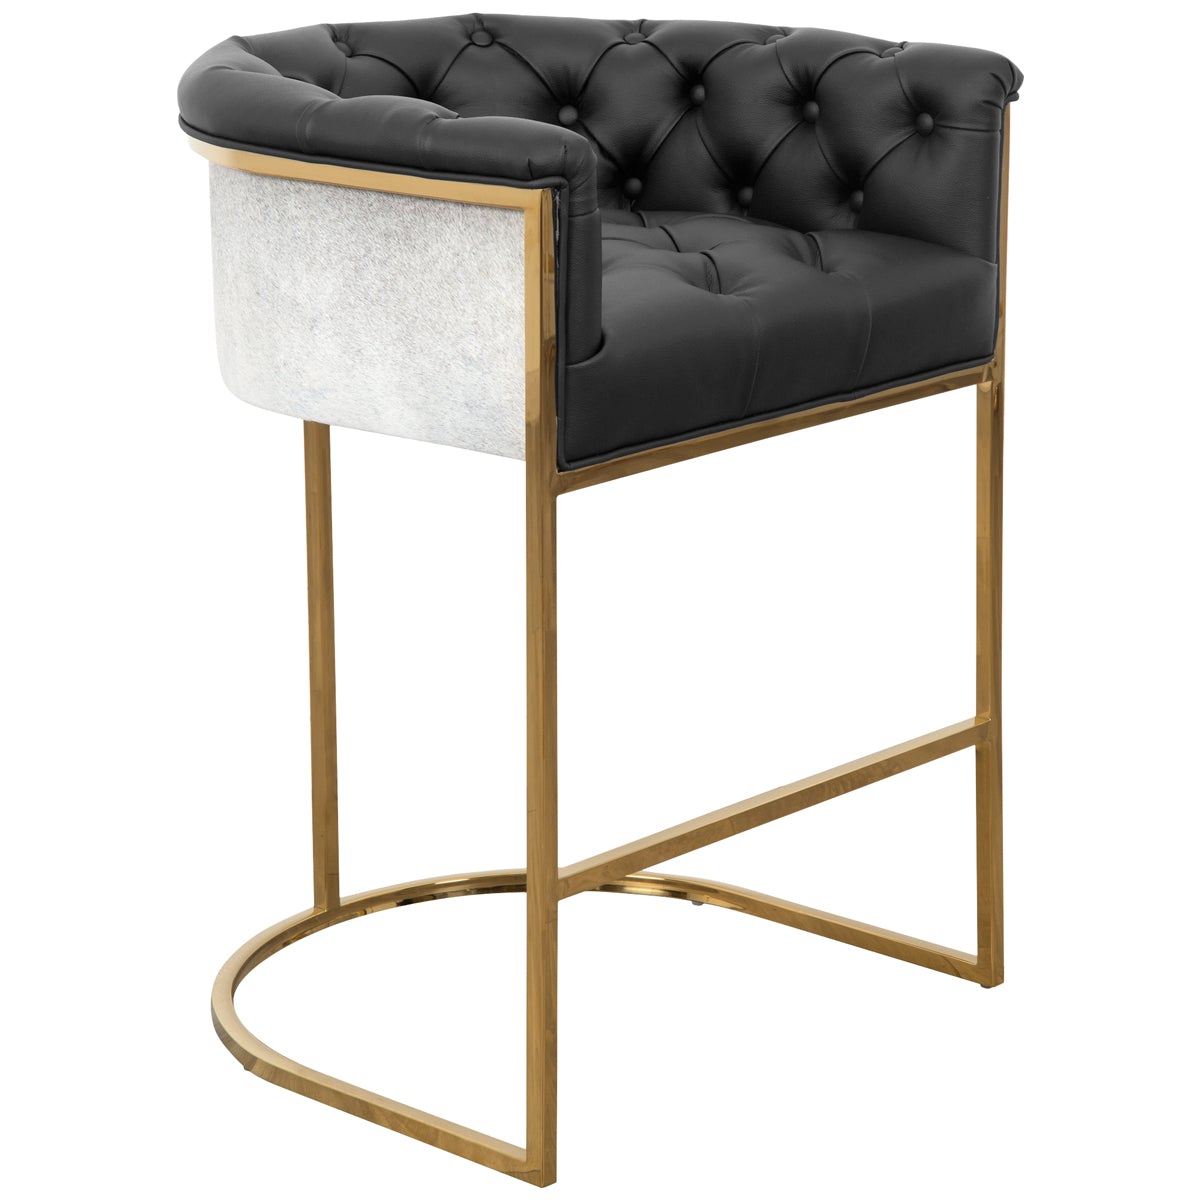 Corfu Bar and Counter Stool in Faux Leather and Cowhide - ModShop1.com